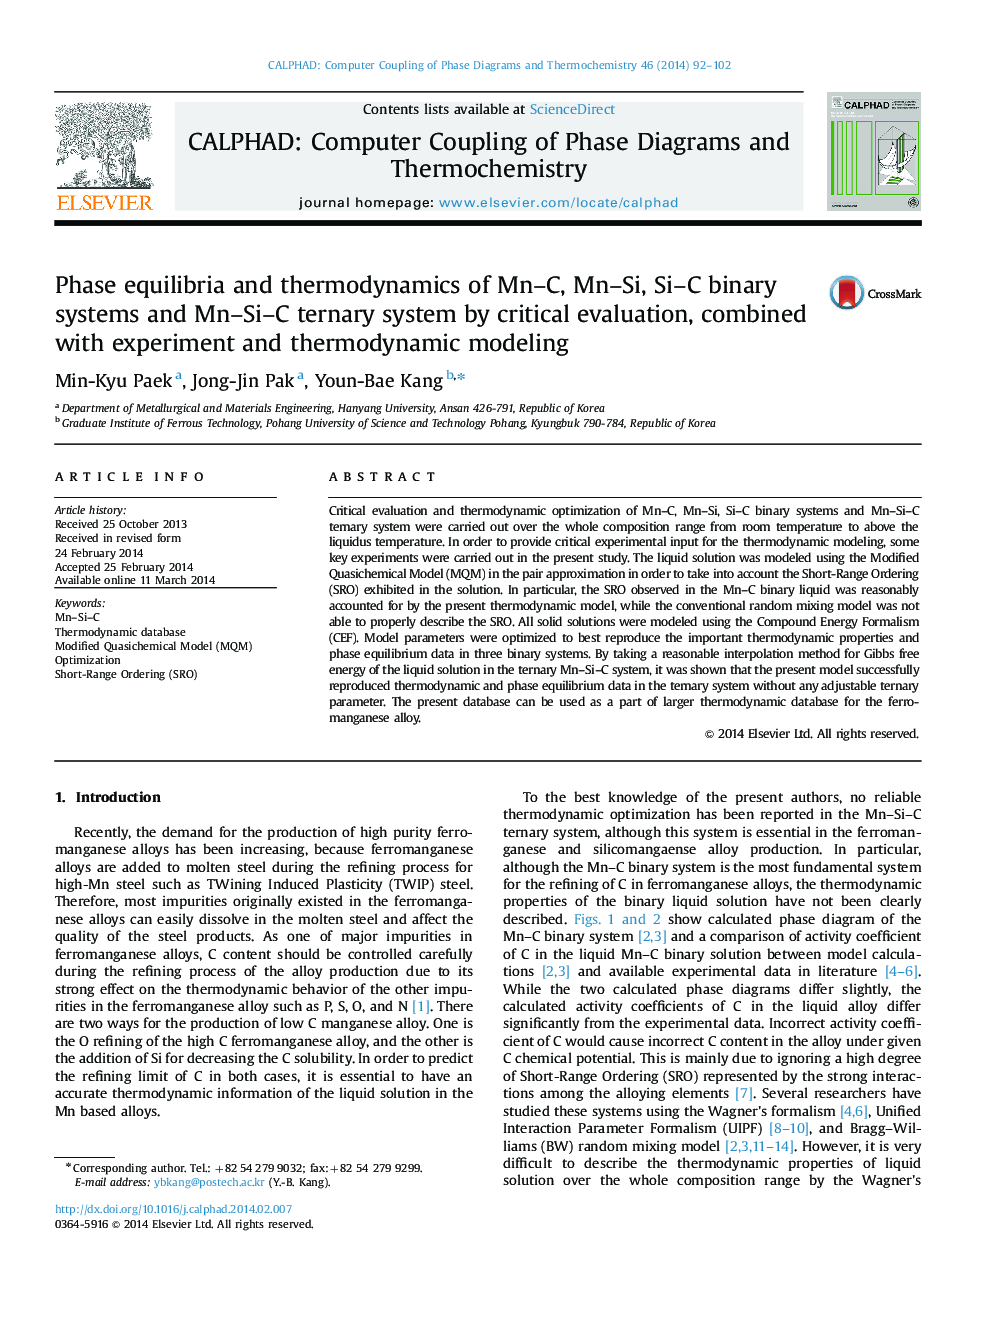 Phase equilibria and thermodynamics of Mn-C, Mn-Si, Si-C binary systems and Mn-Si-C ternary system by critical evaluation, combined with experiment and thermodynamic modeling